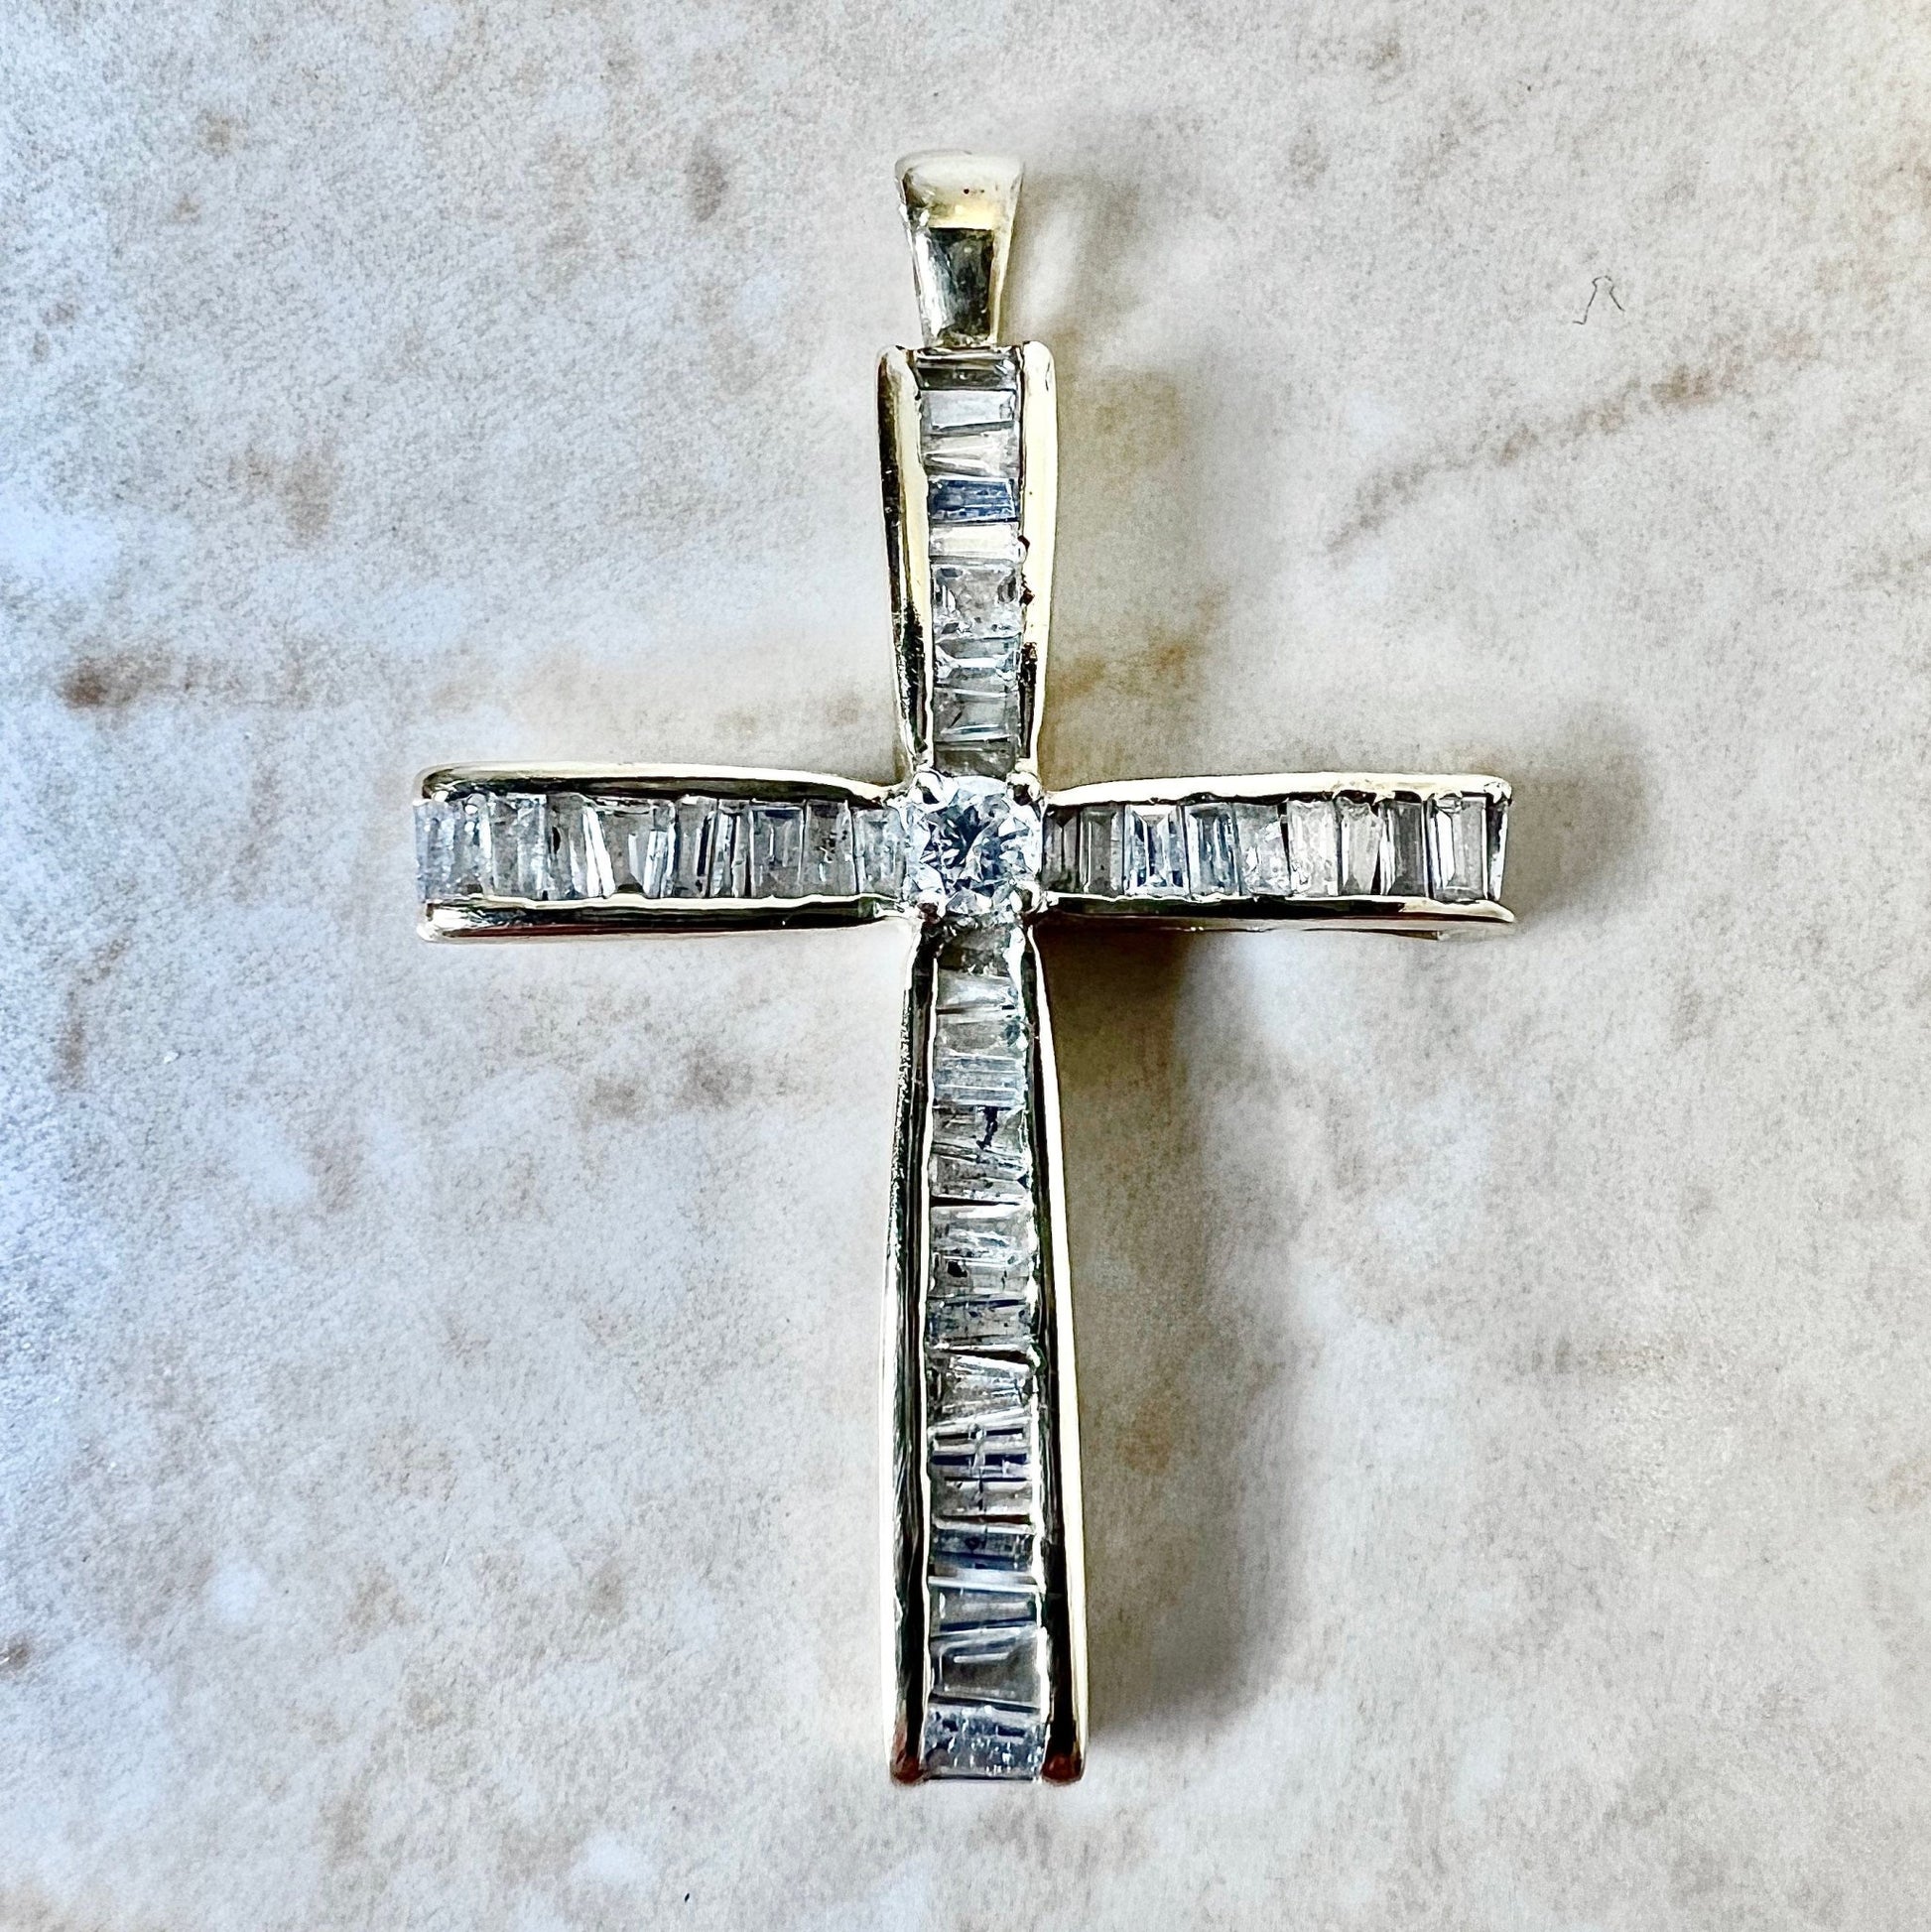 Vintage 10K Diamond Cross Pendant Necklace 1 CTTW - Yellow Gold Diamond Pendant - Religious Jewelry - Mother’s Day Gift - Best Gifts For Her